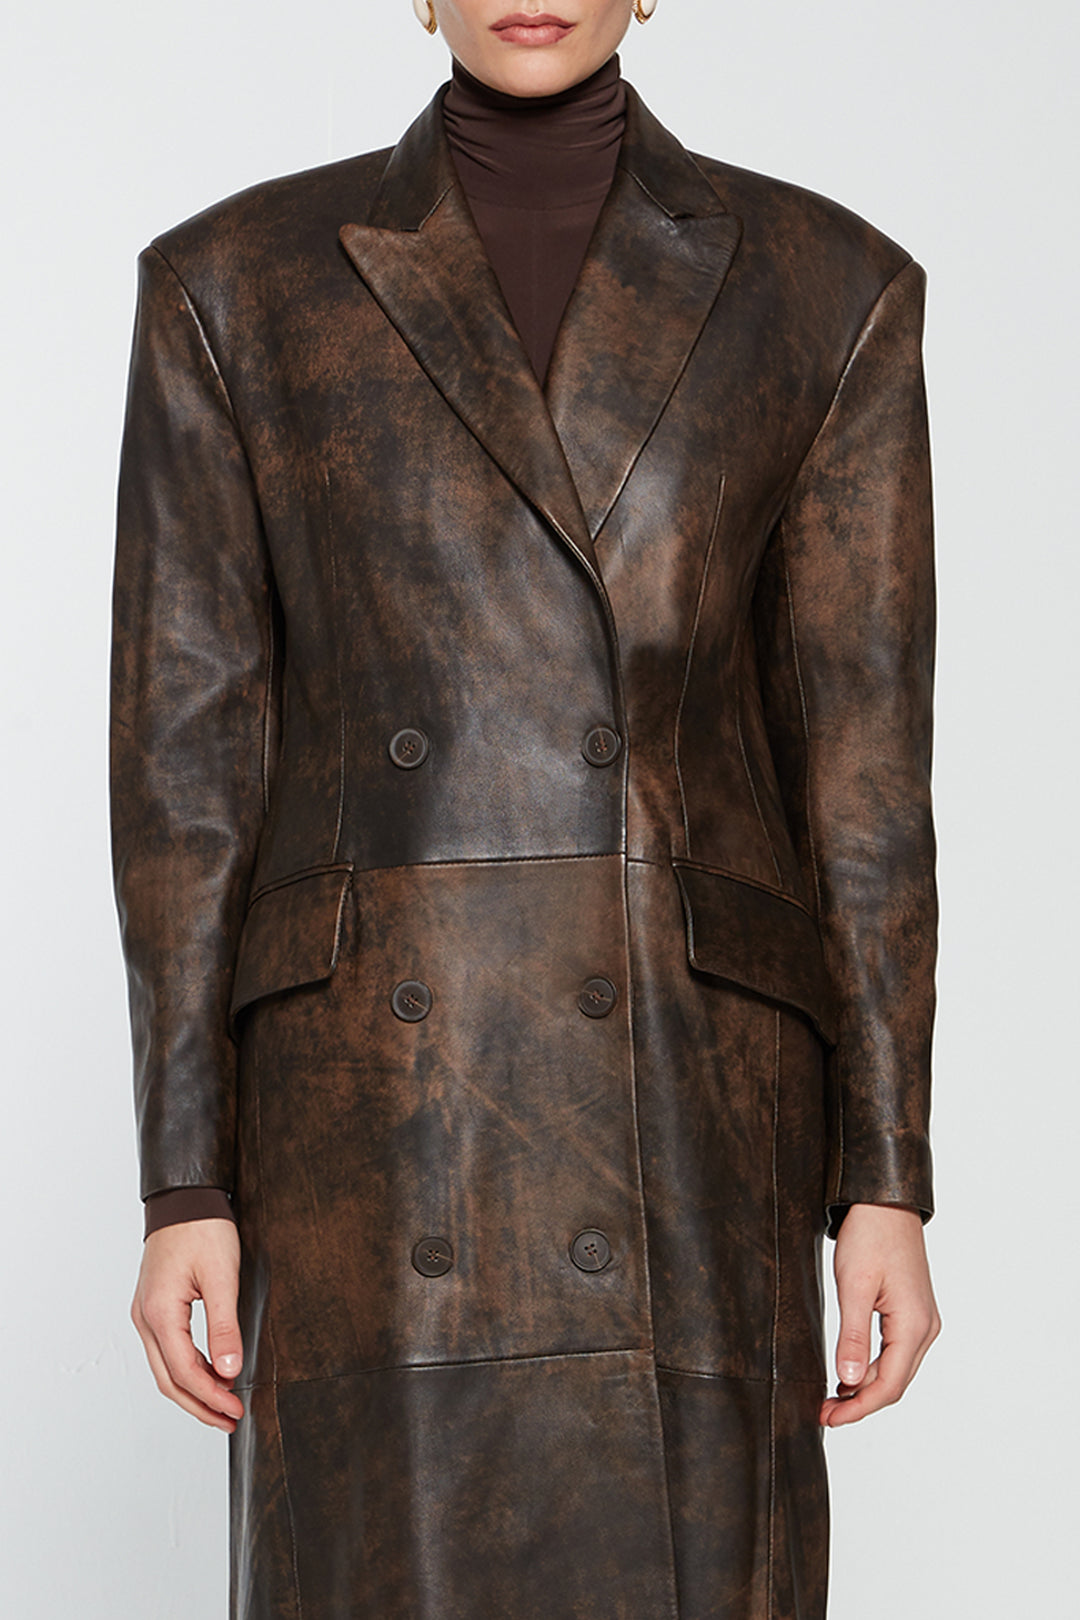 Aggie Distressed Leather Coat